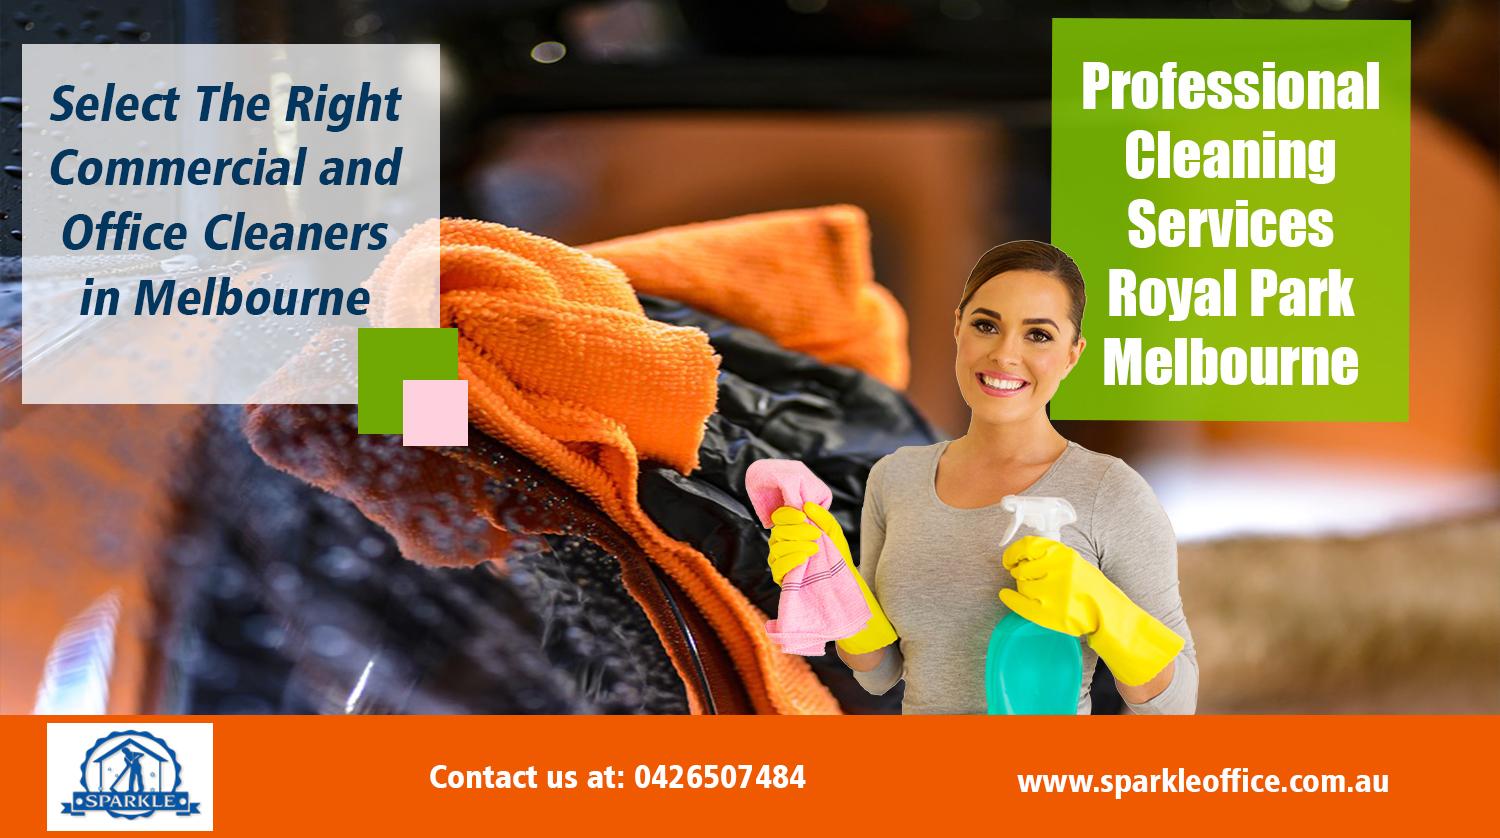 Professional Cleaning Services Royal Park Melbourne